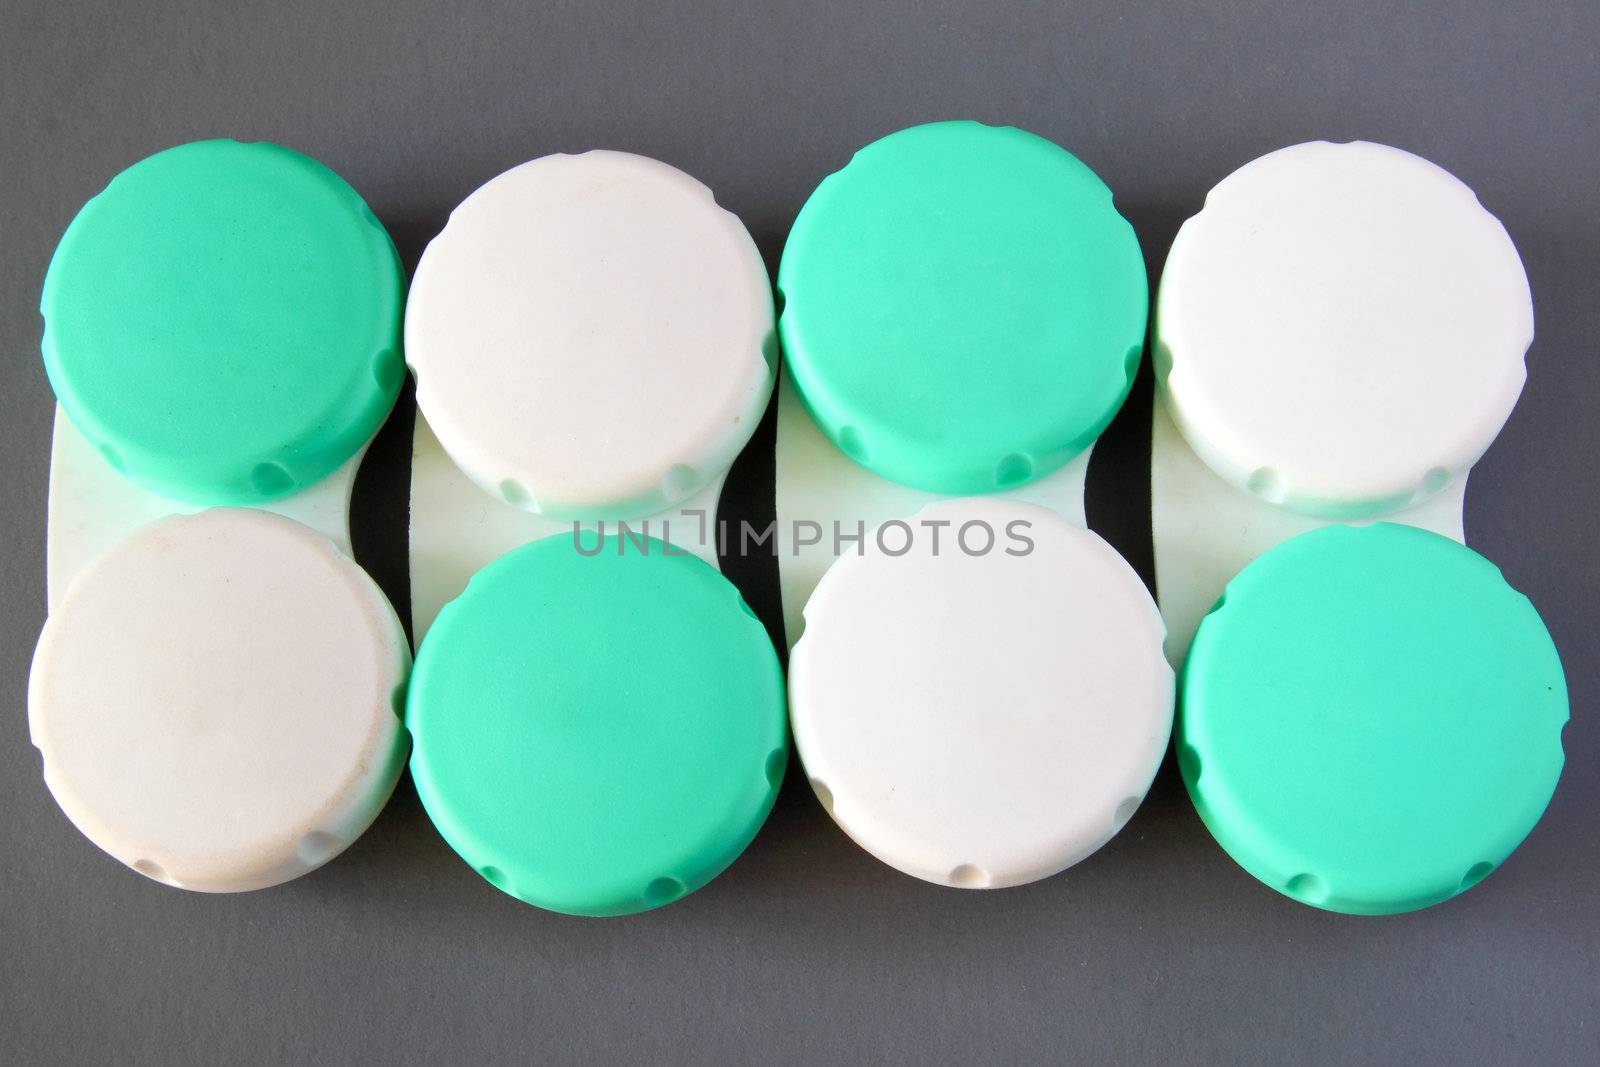 Contact Lens Container on grey background